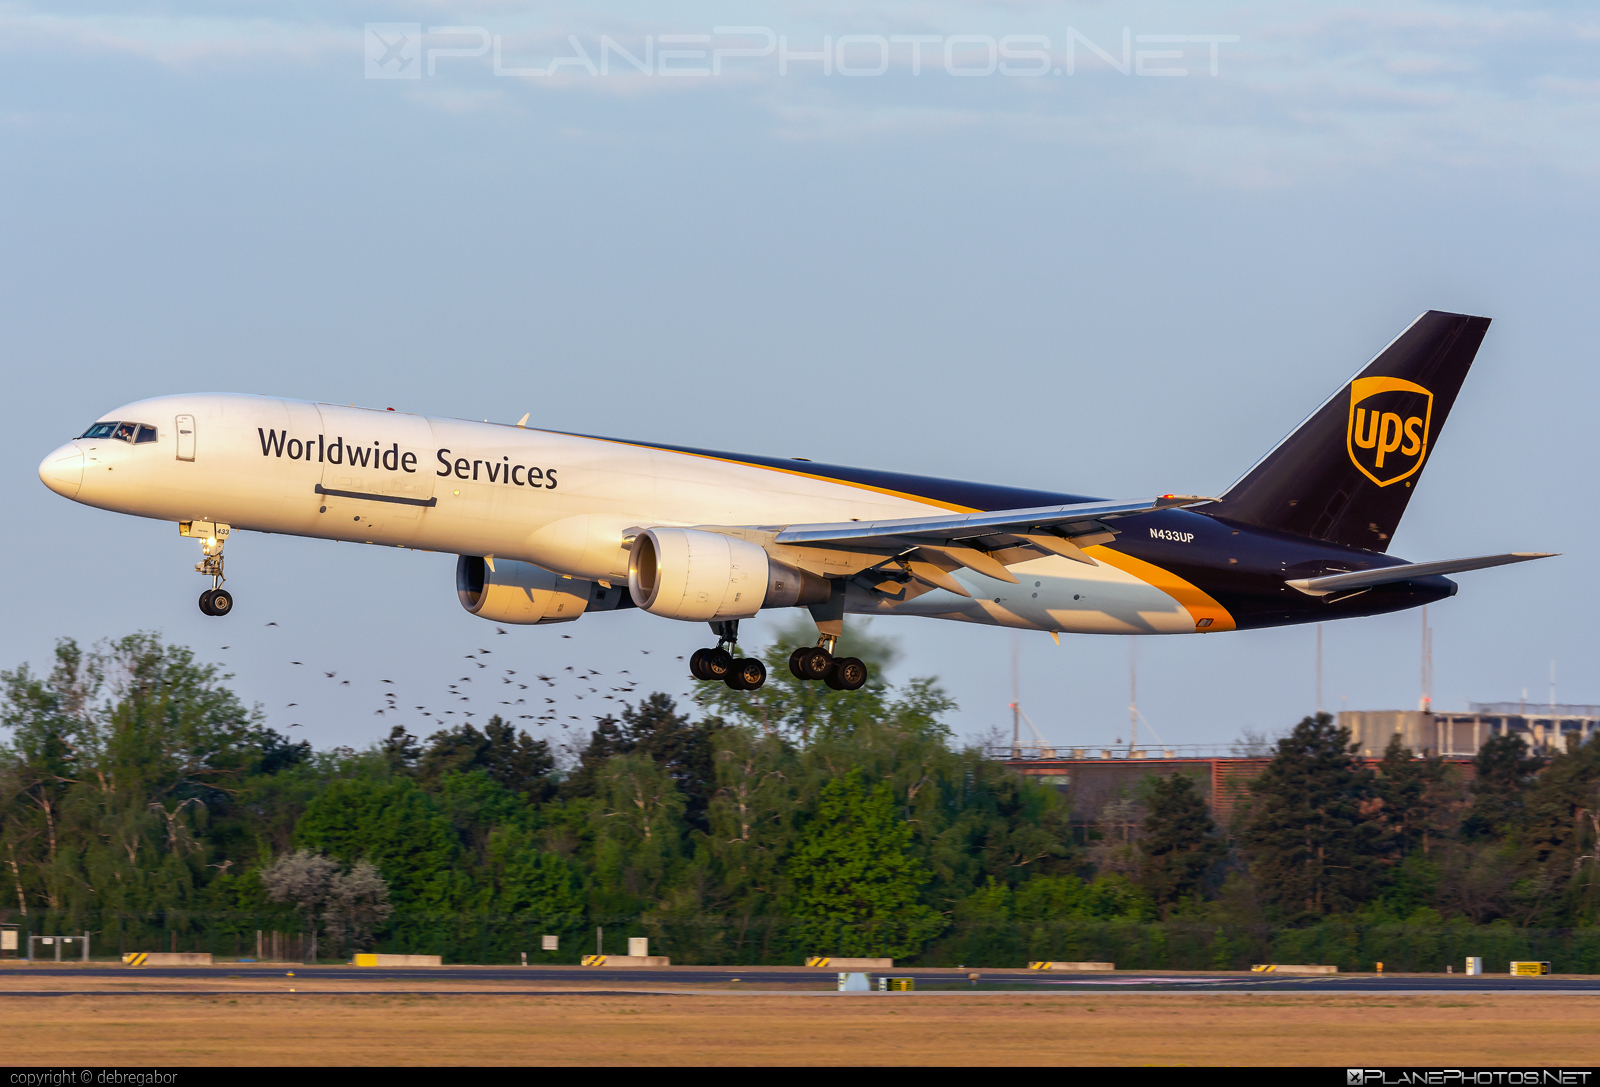 Boeing 757-200PF - N433UP operated by United Parcel Service (UPS) #b757 #boeing #boeing757 #ups #upsairlines